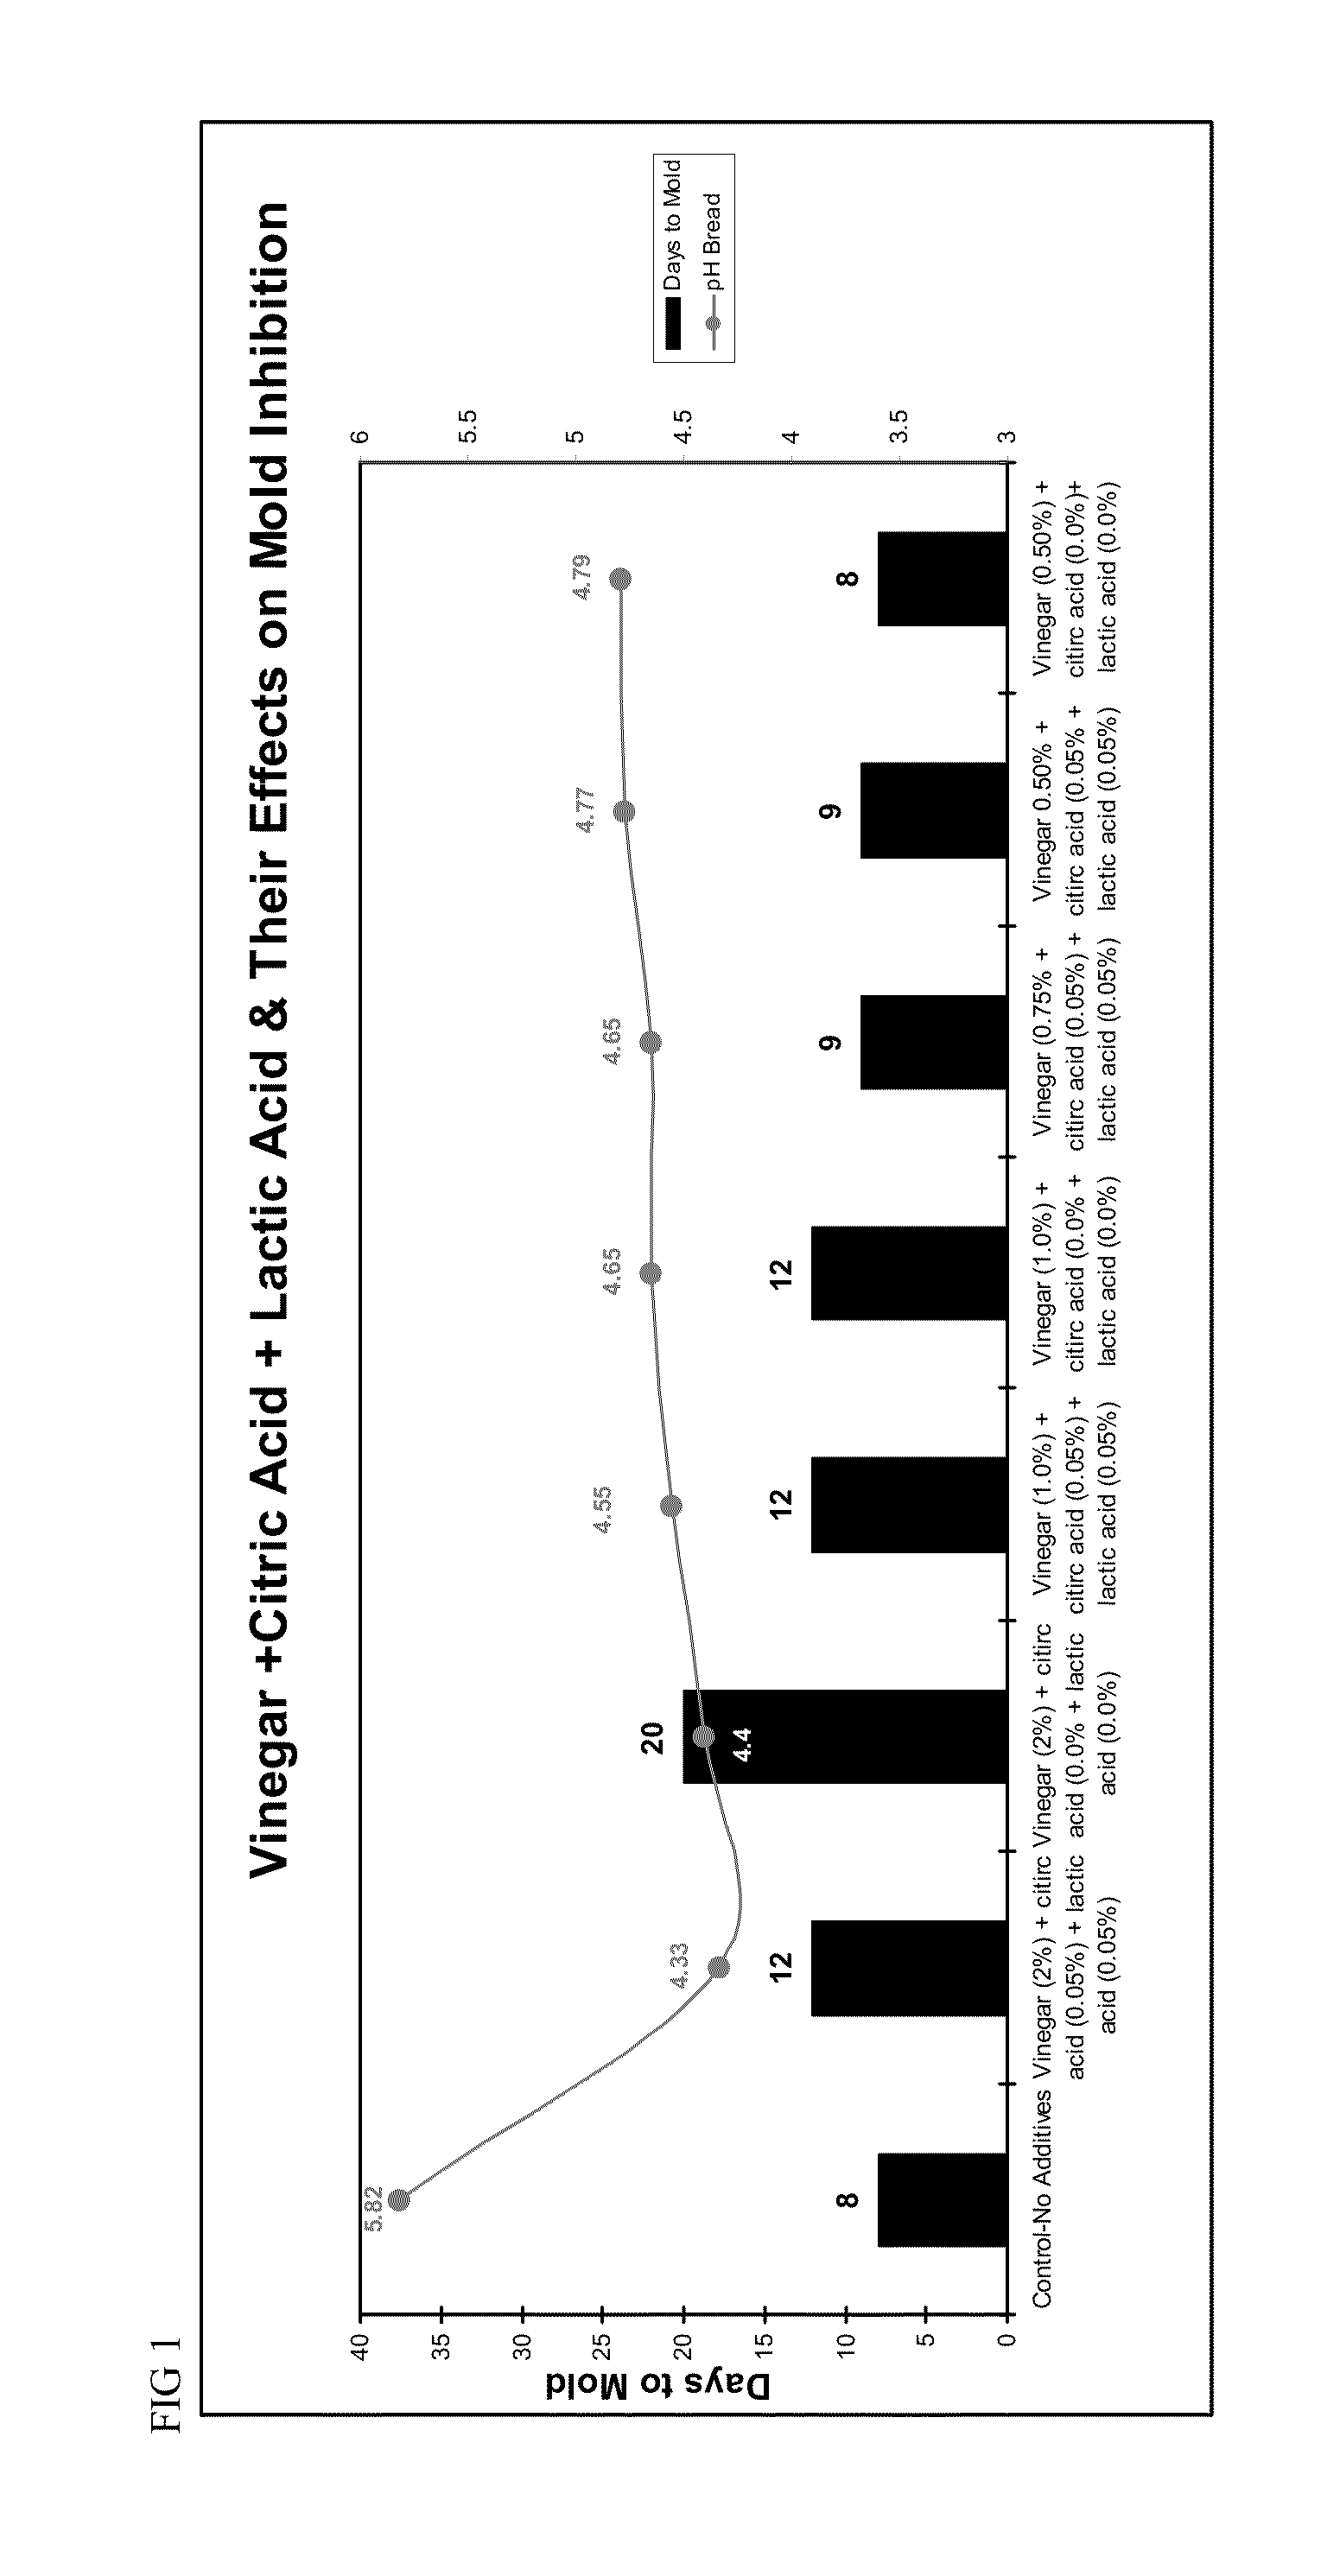 Natural Mold Inhibitor and Methods of Using Same